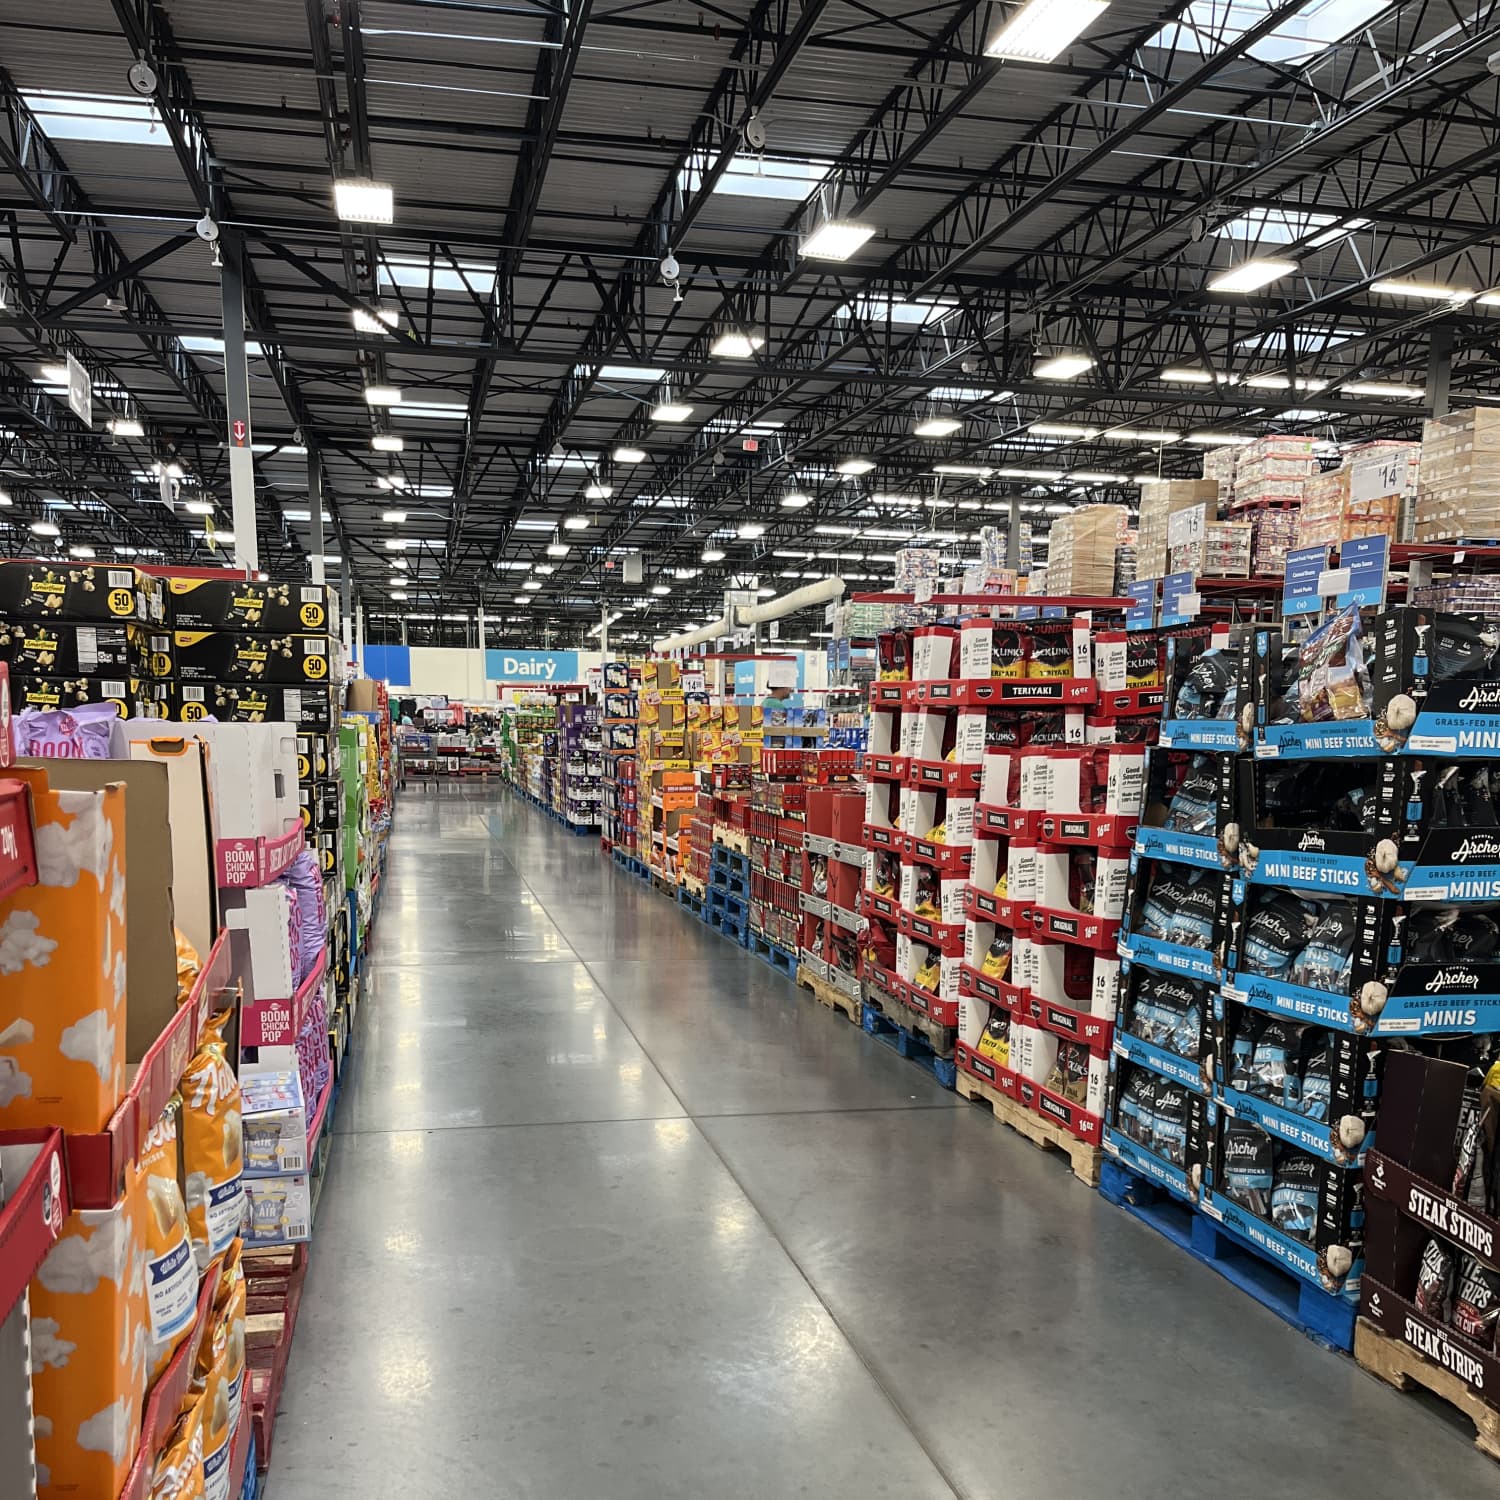 Outer Aisle - Have you found us at Costco yet? 🛒⁠ ⁠ Be sure to grab our  Original Sandwich Thins at select Costco clubs! To find a club near you,  check out